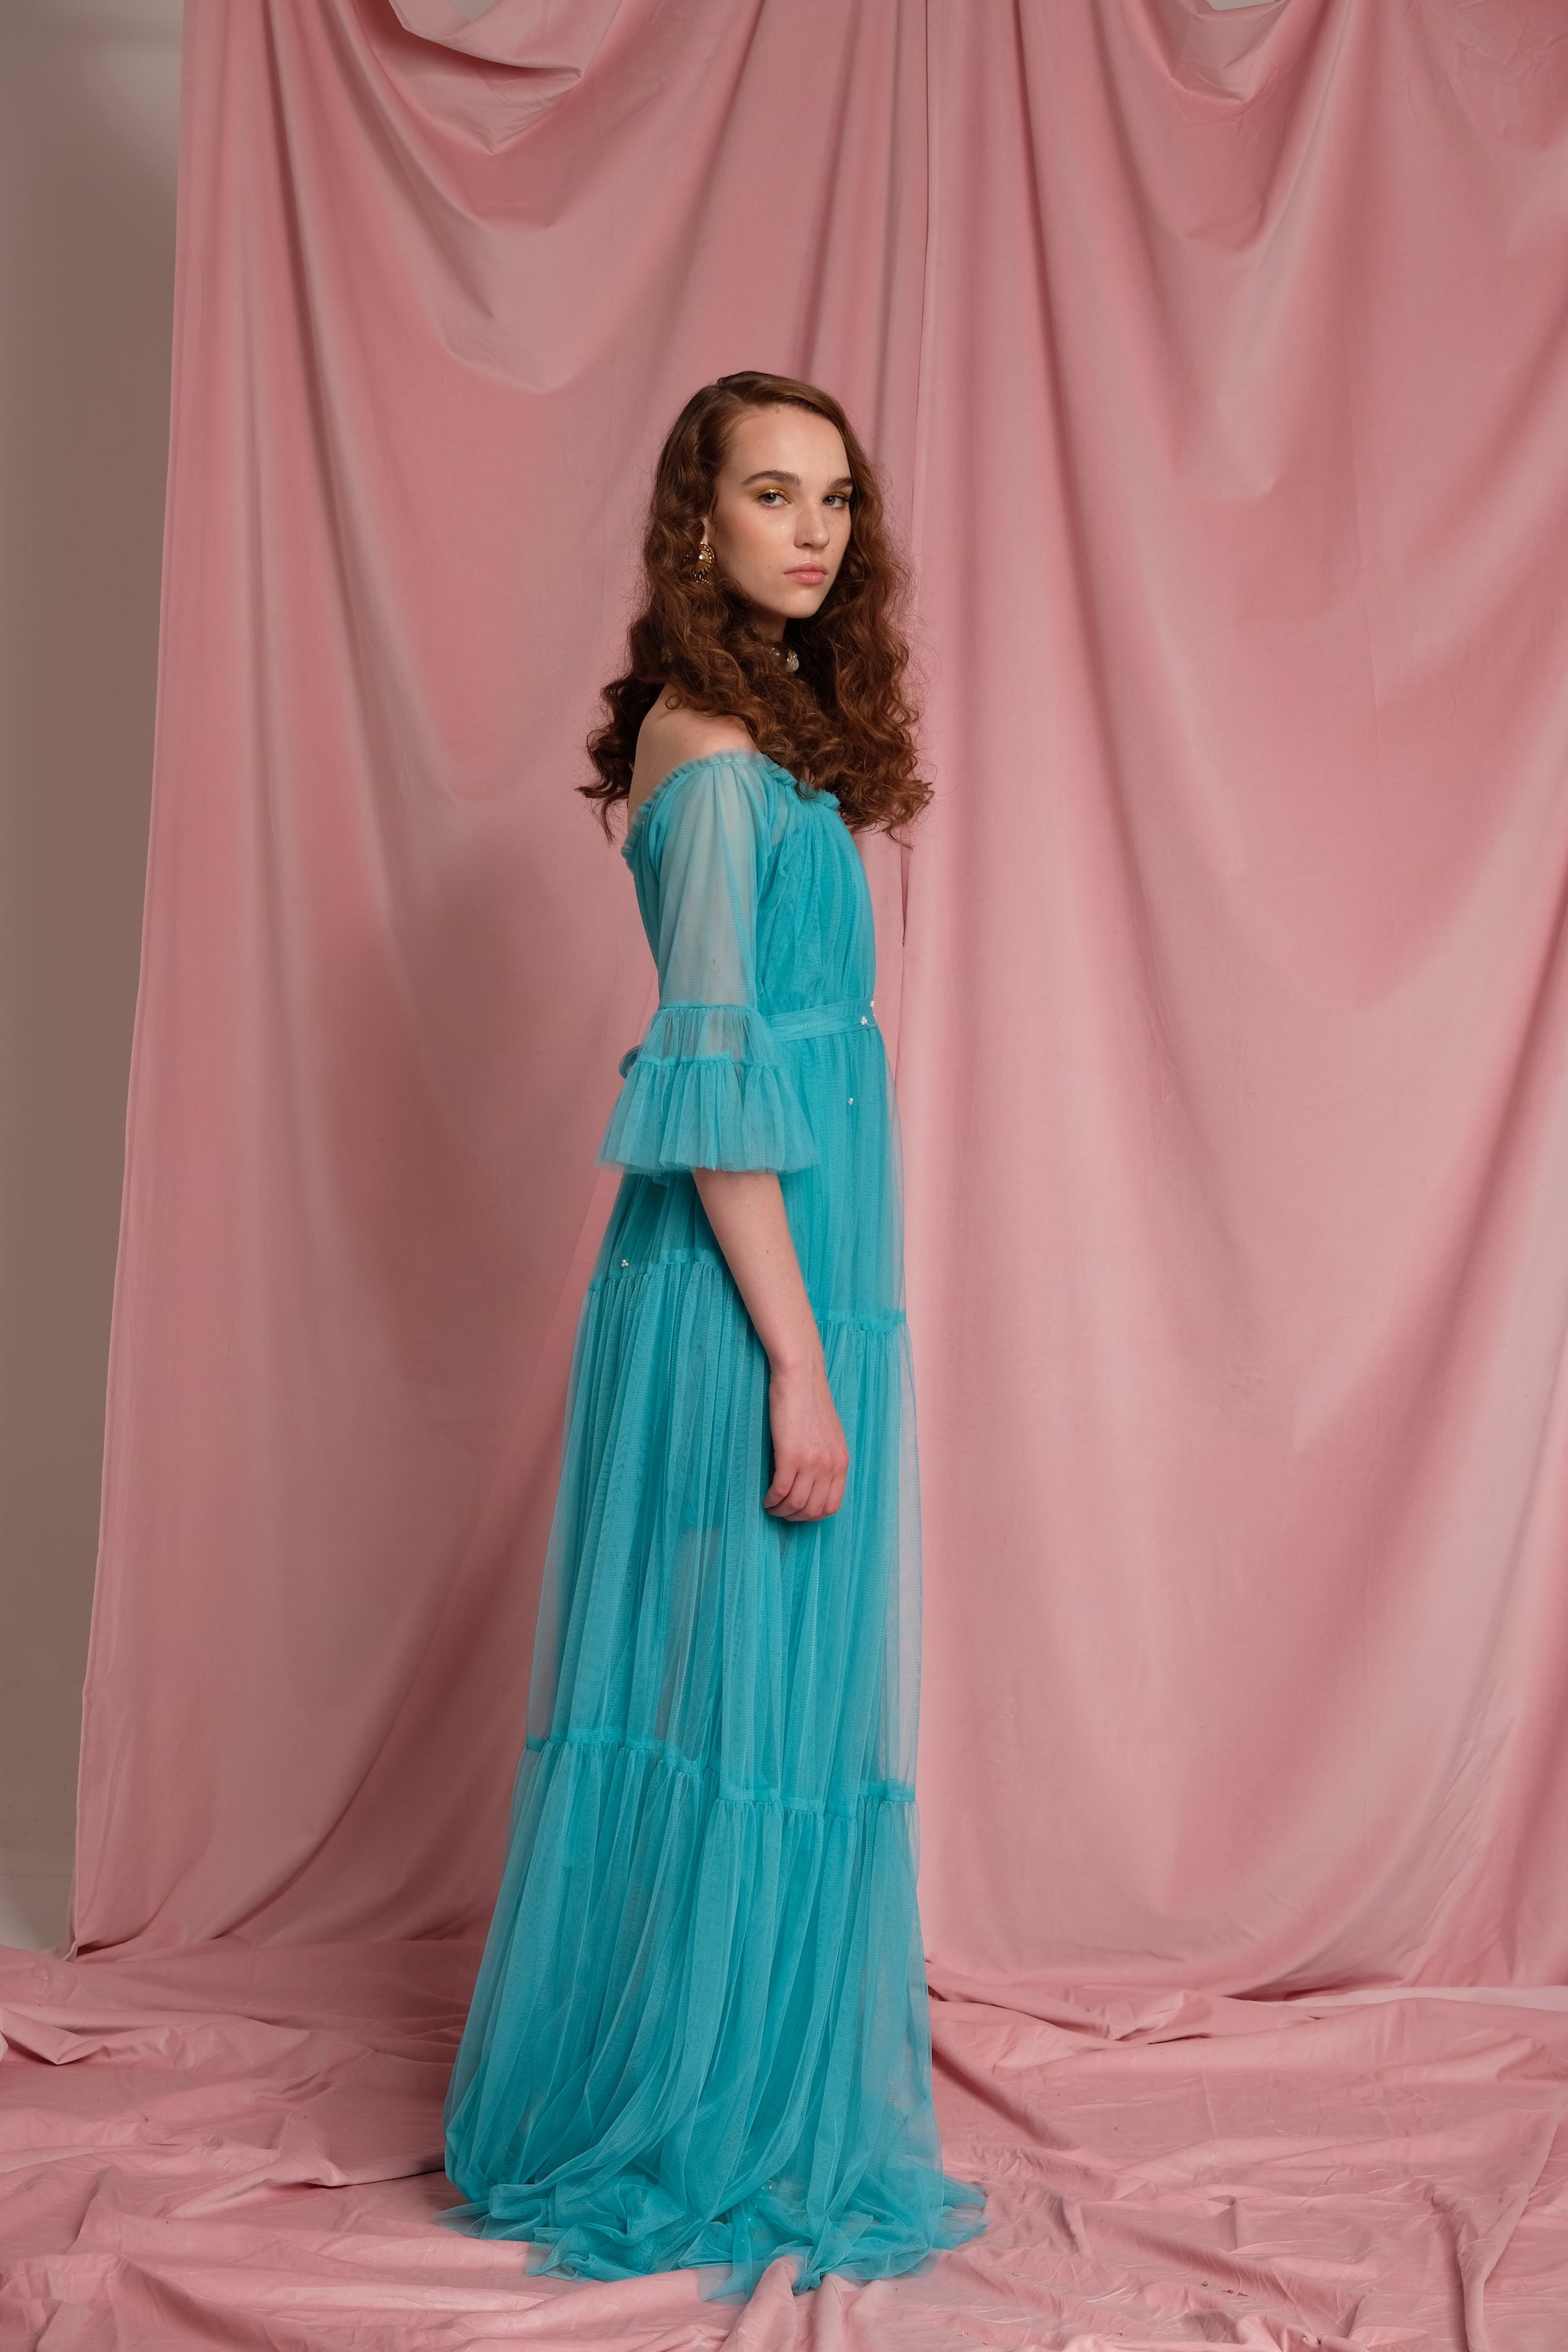 Turquoise Adjustable Offshoulder Tulle Princess Dress with Pearls